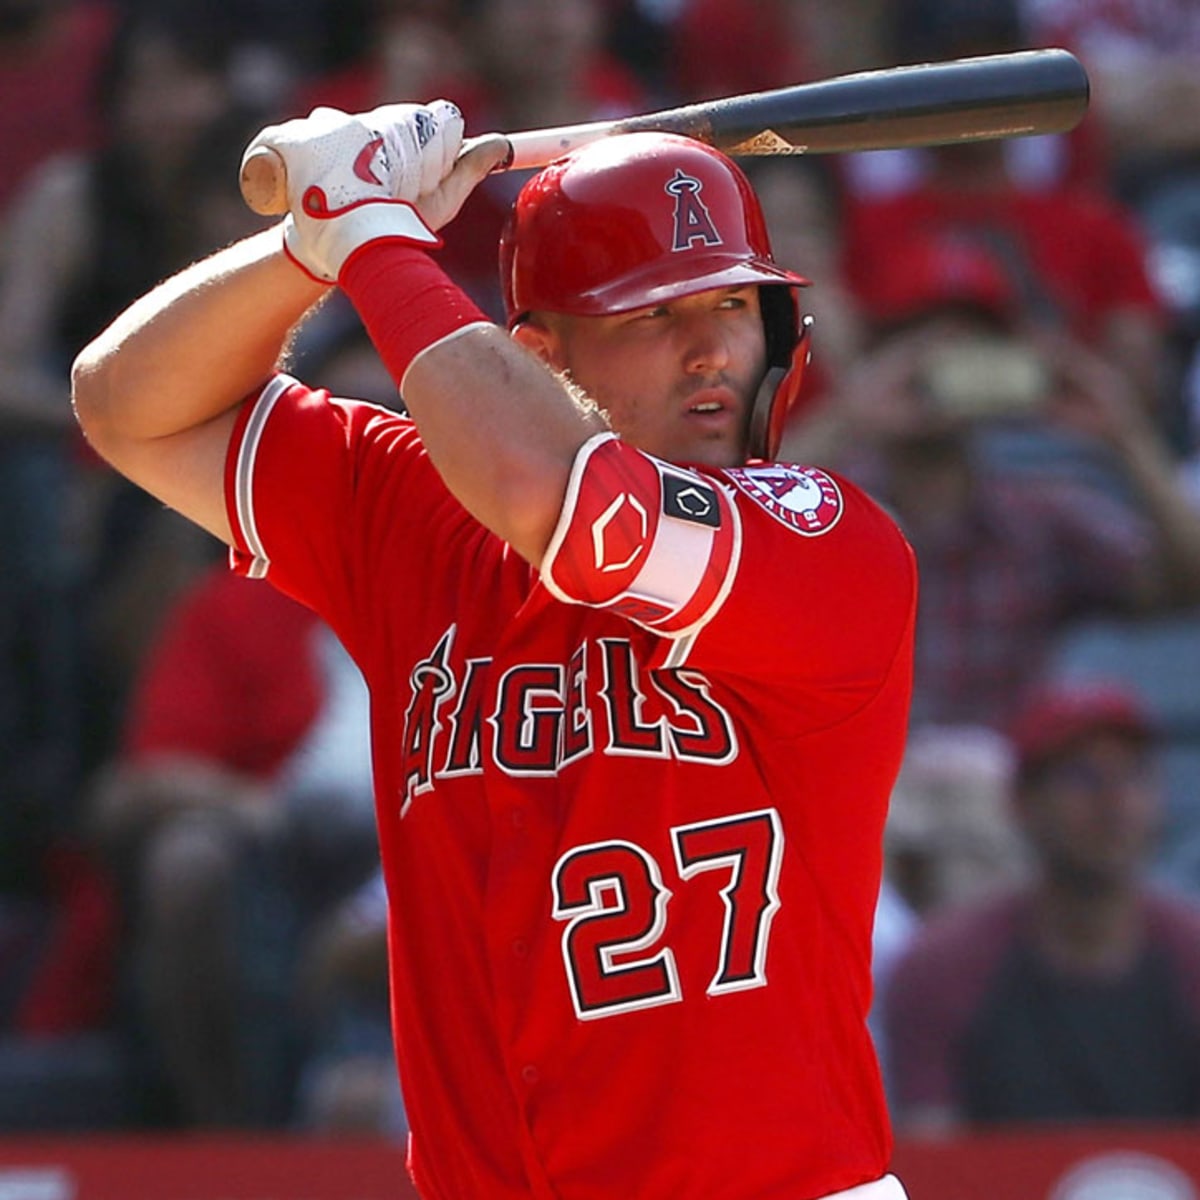 Spring training: The Angels must make better use of Mike Trout